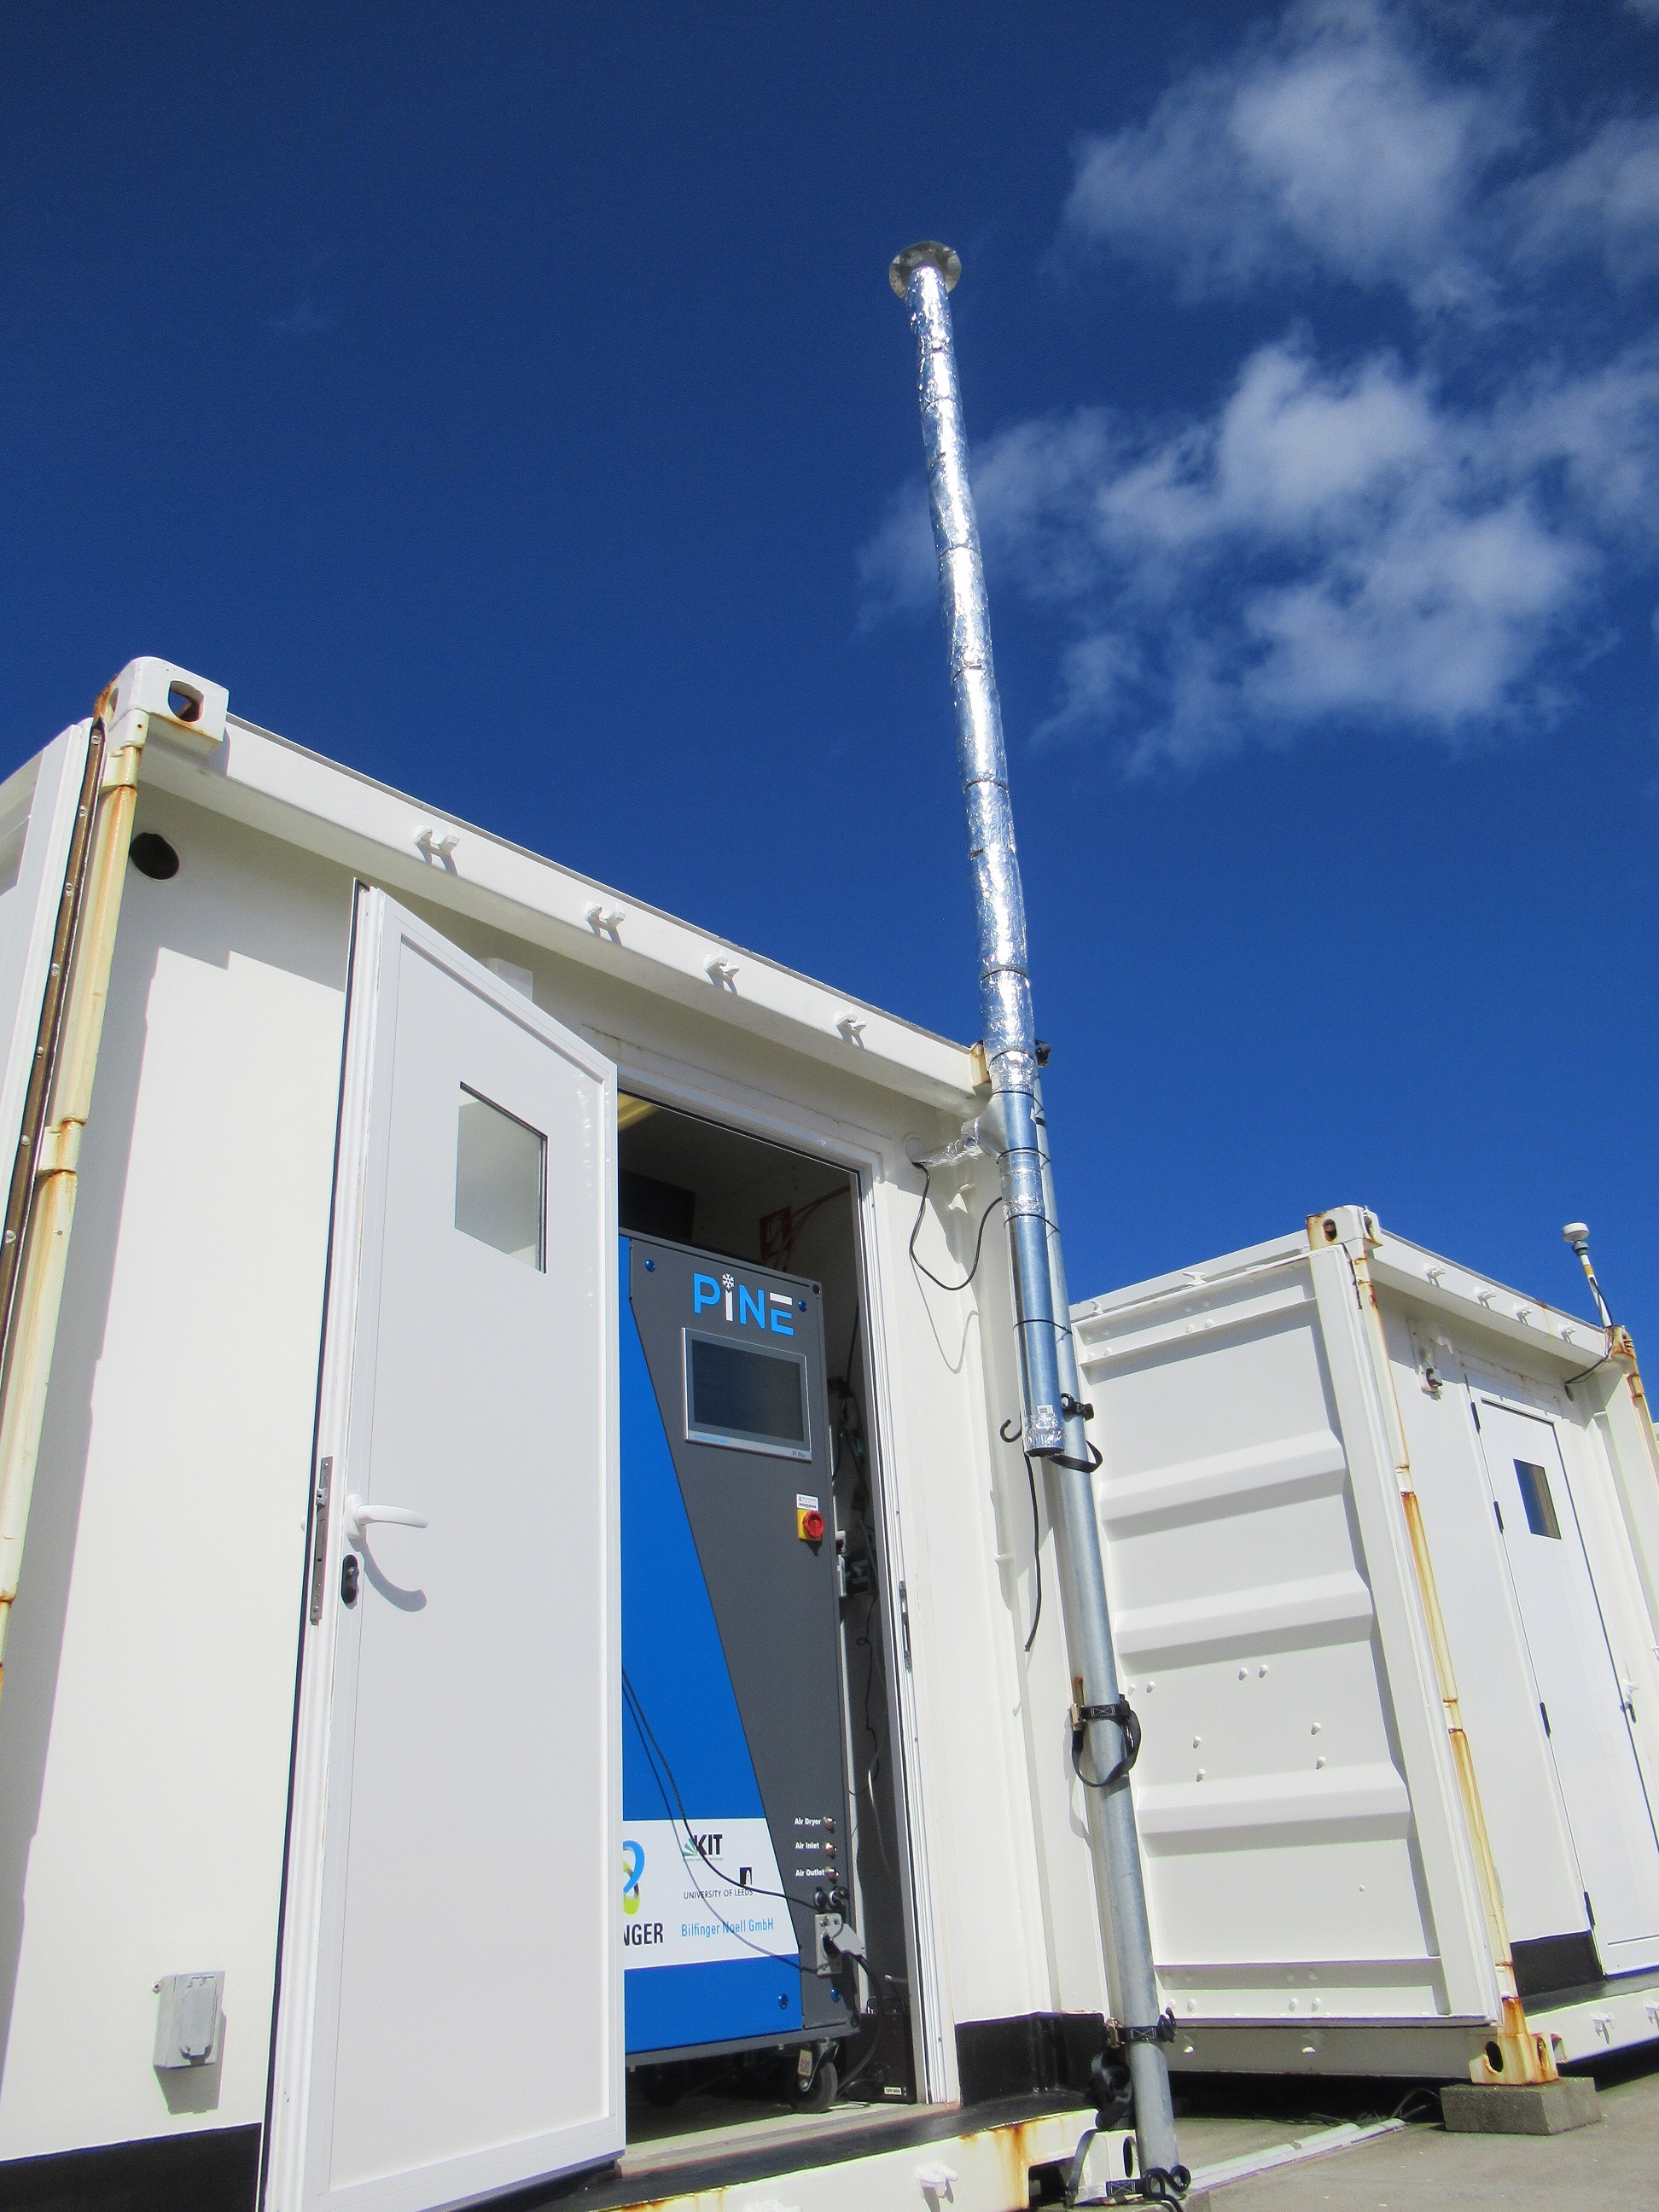 The PINE chamber operates inside a container while an aerosol stack stretches from the ground up toward the sky.